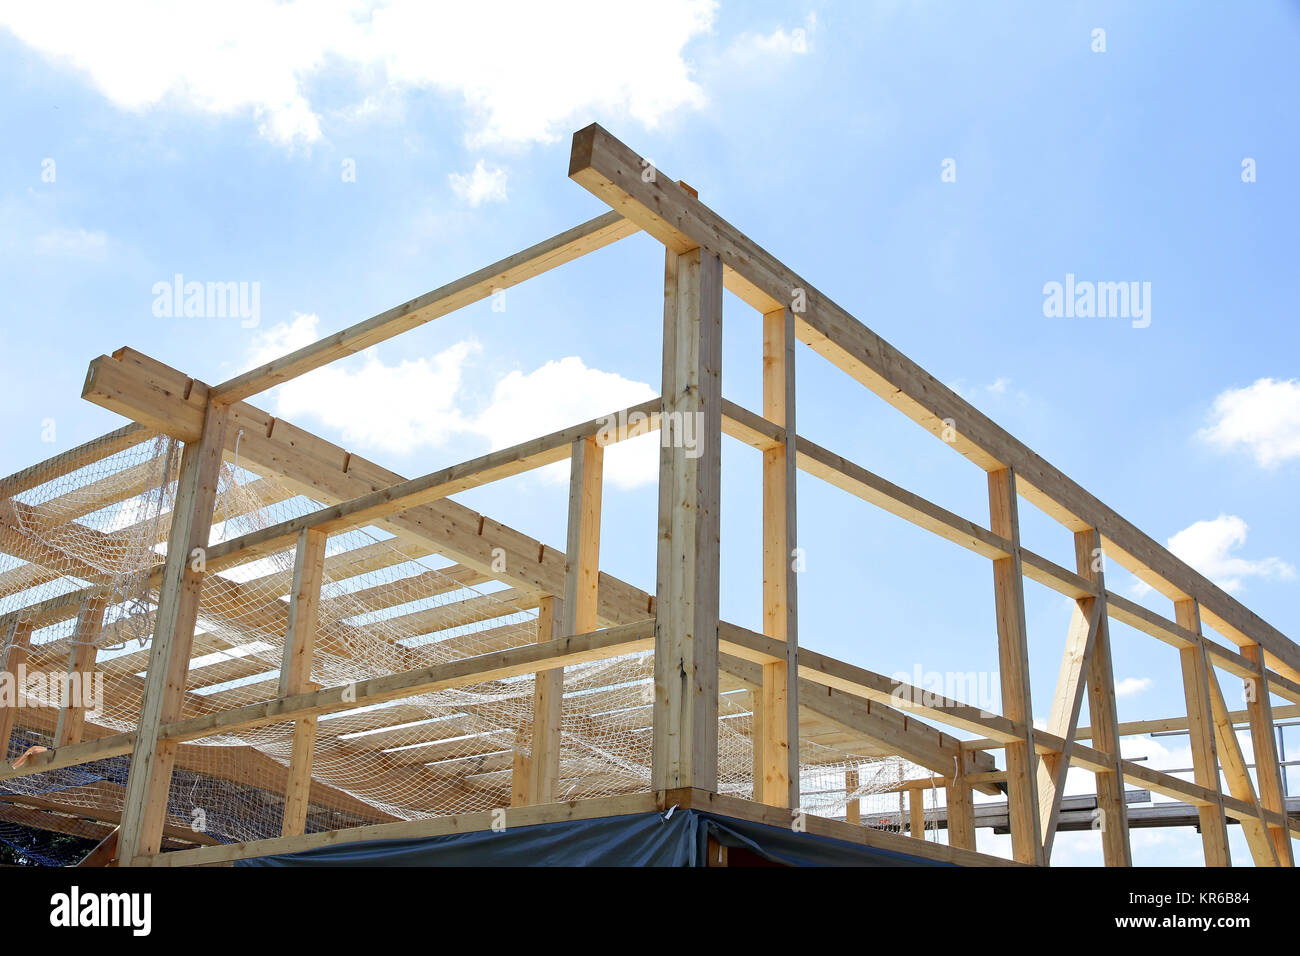 the construction of a wooden house. carcass of a wooden house Stock Photo